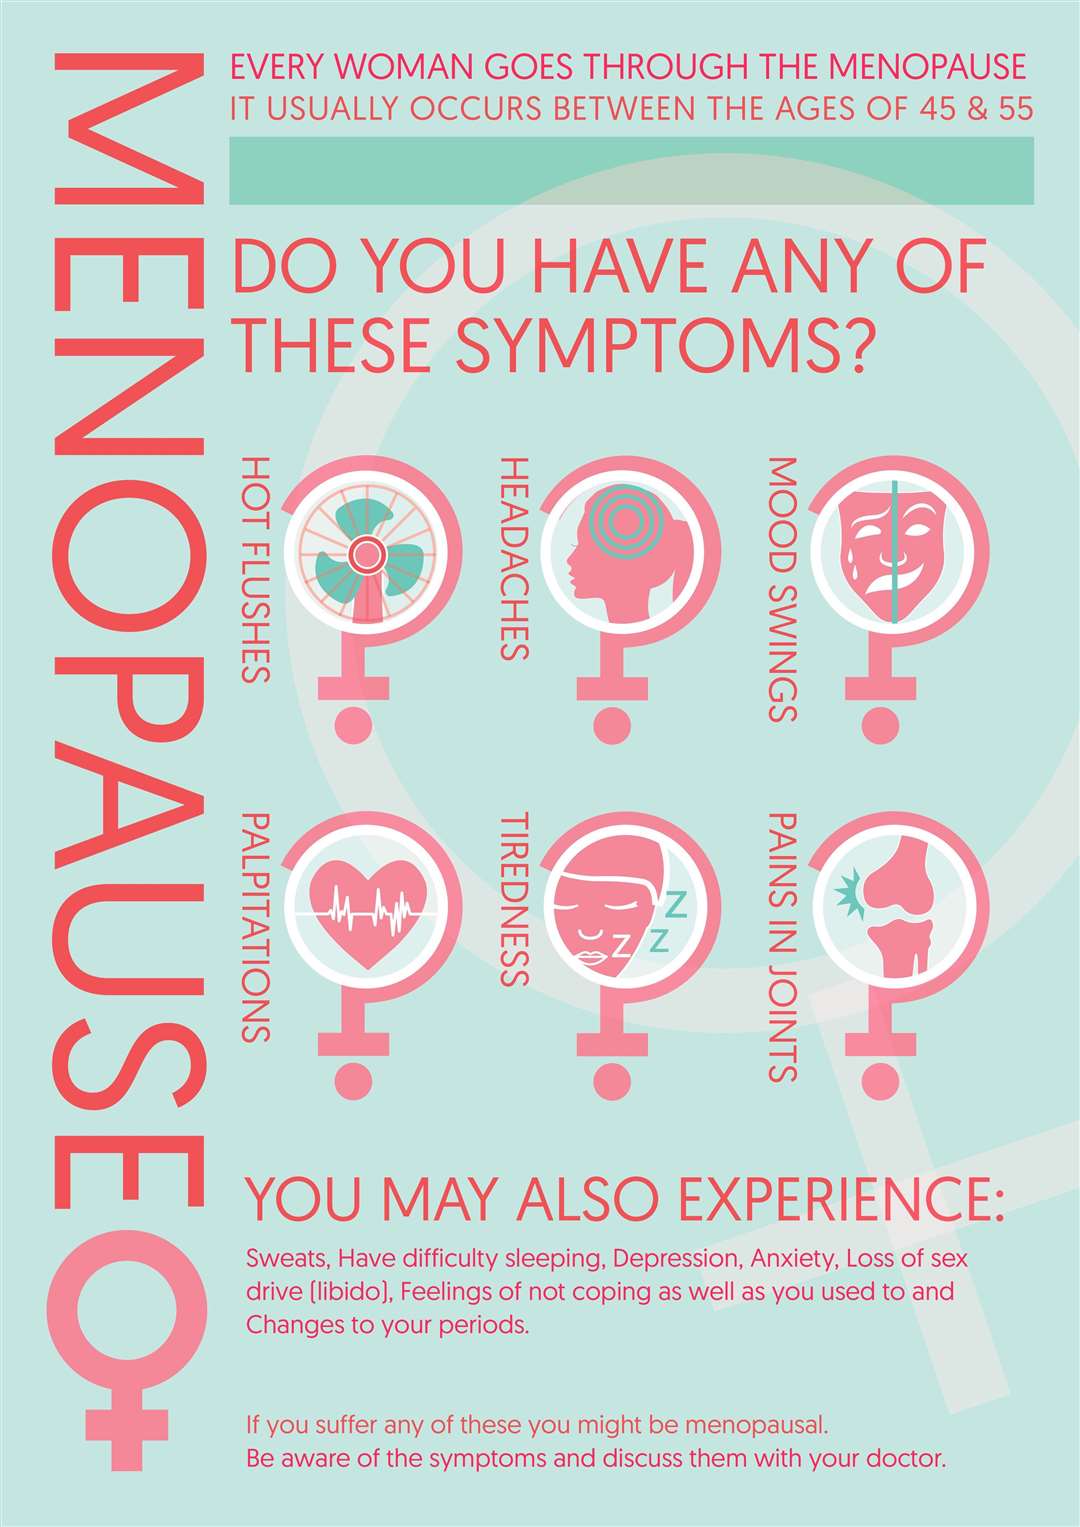 The poster which aims to increase awareness of menopause symptons.